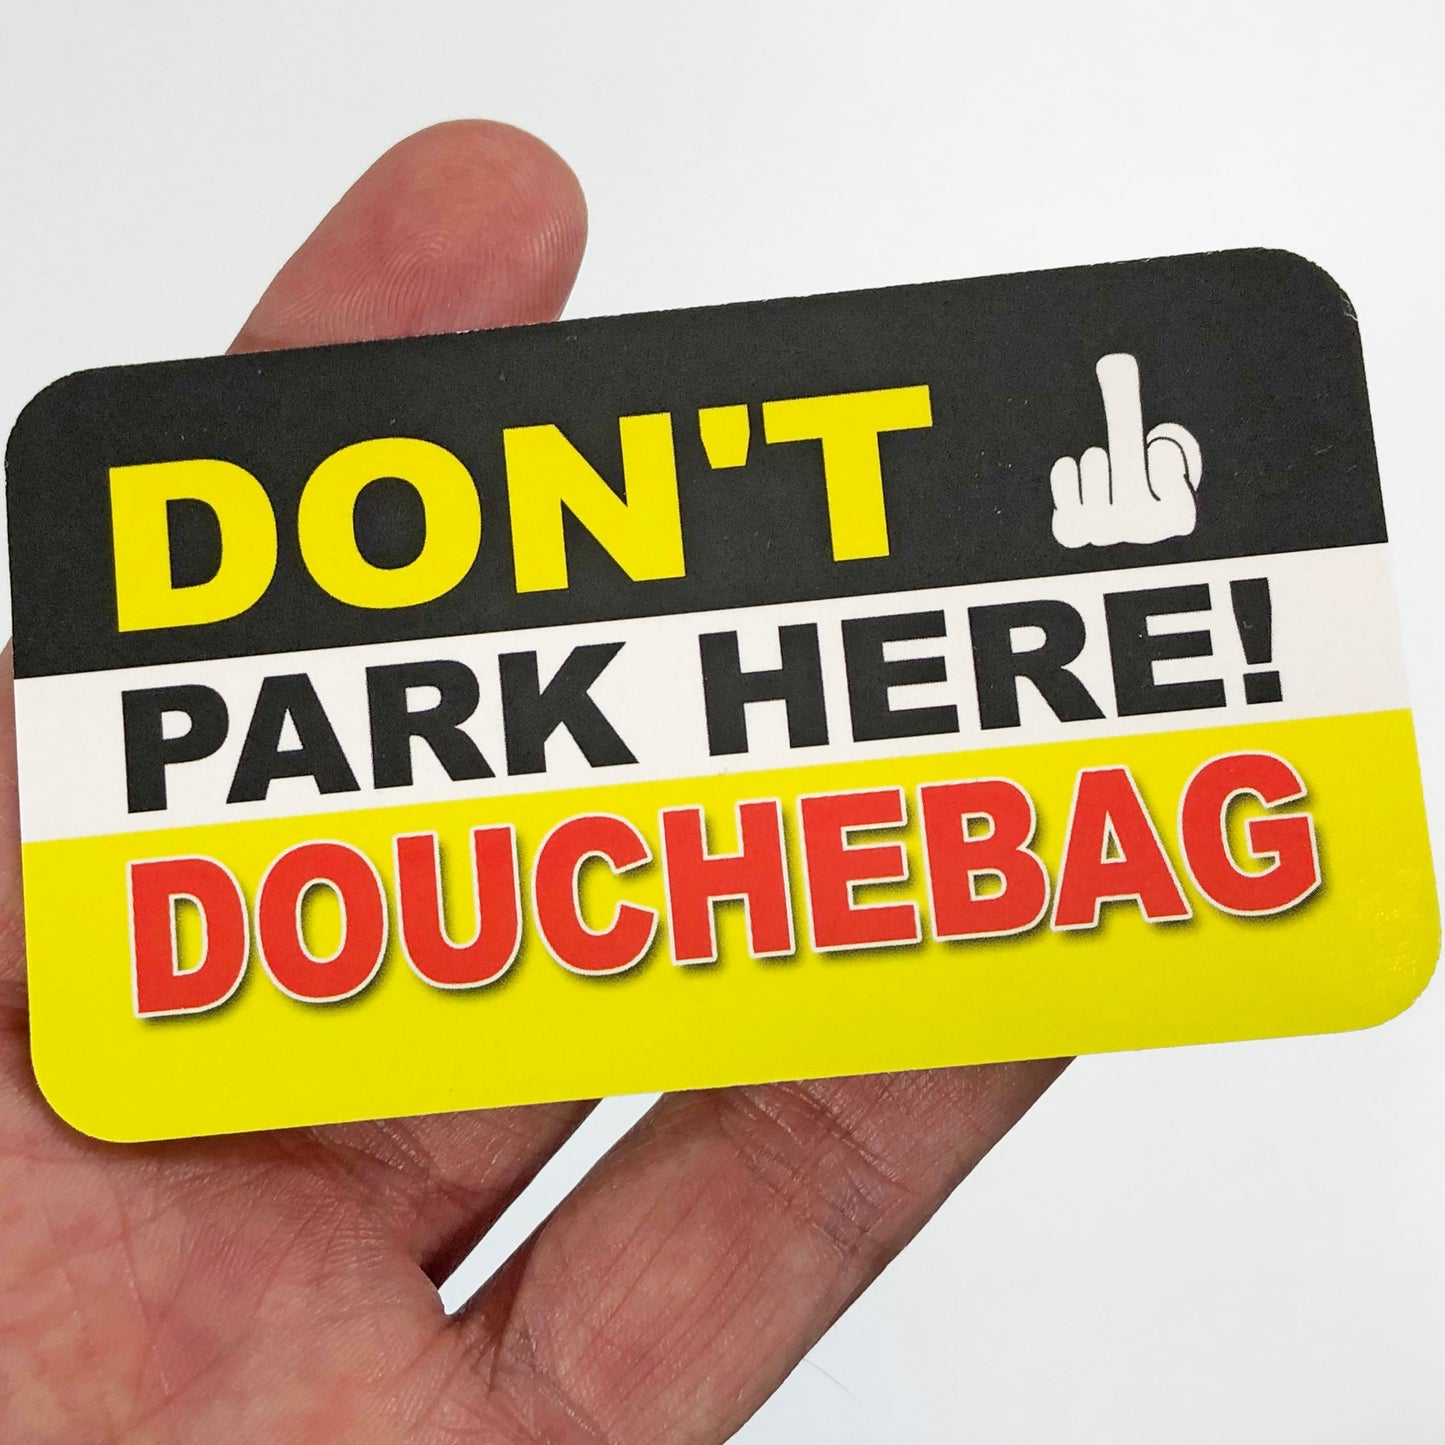 Handicapped Parking Douchebag Parking Prank Cards that you leave under Windshield Wipers to get your point across!